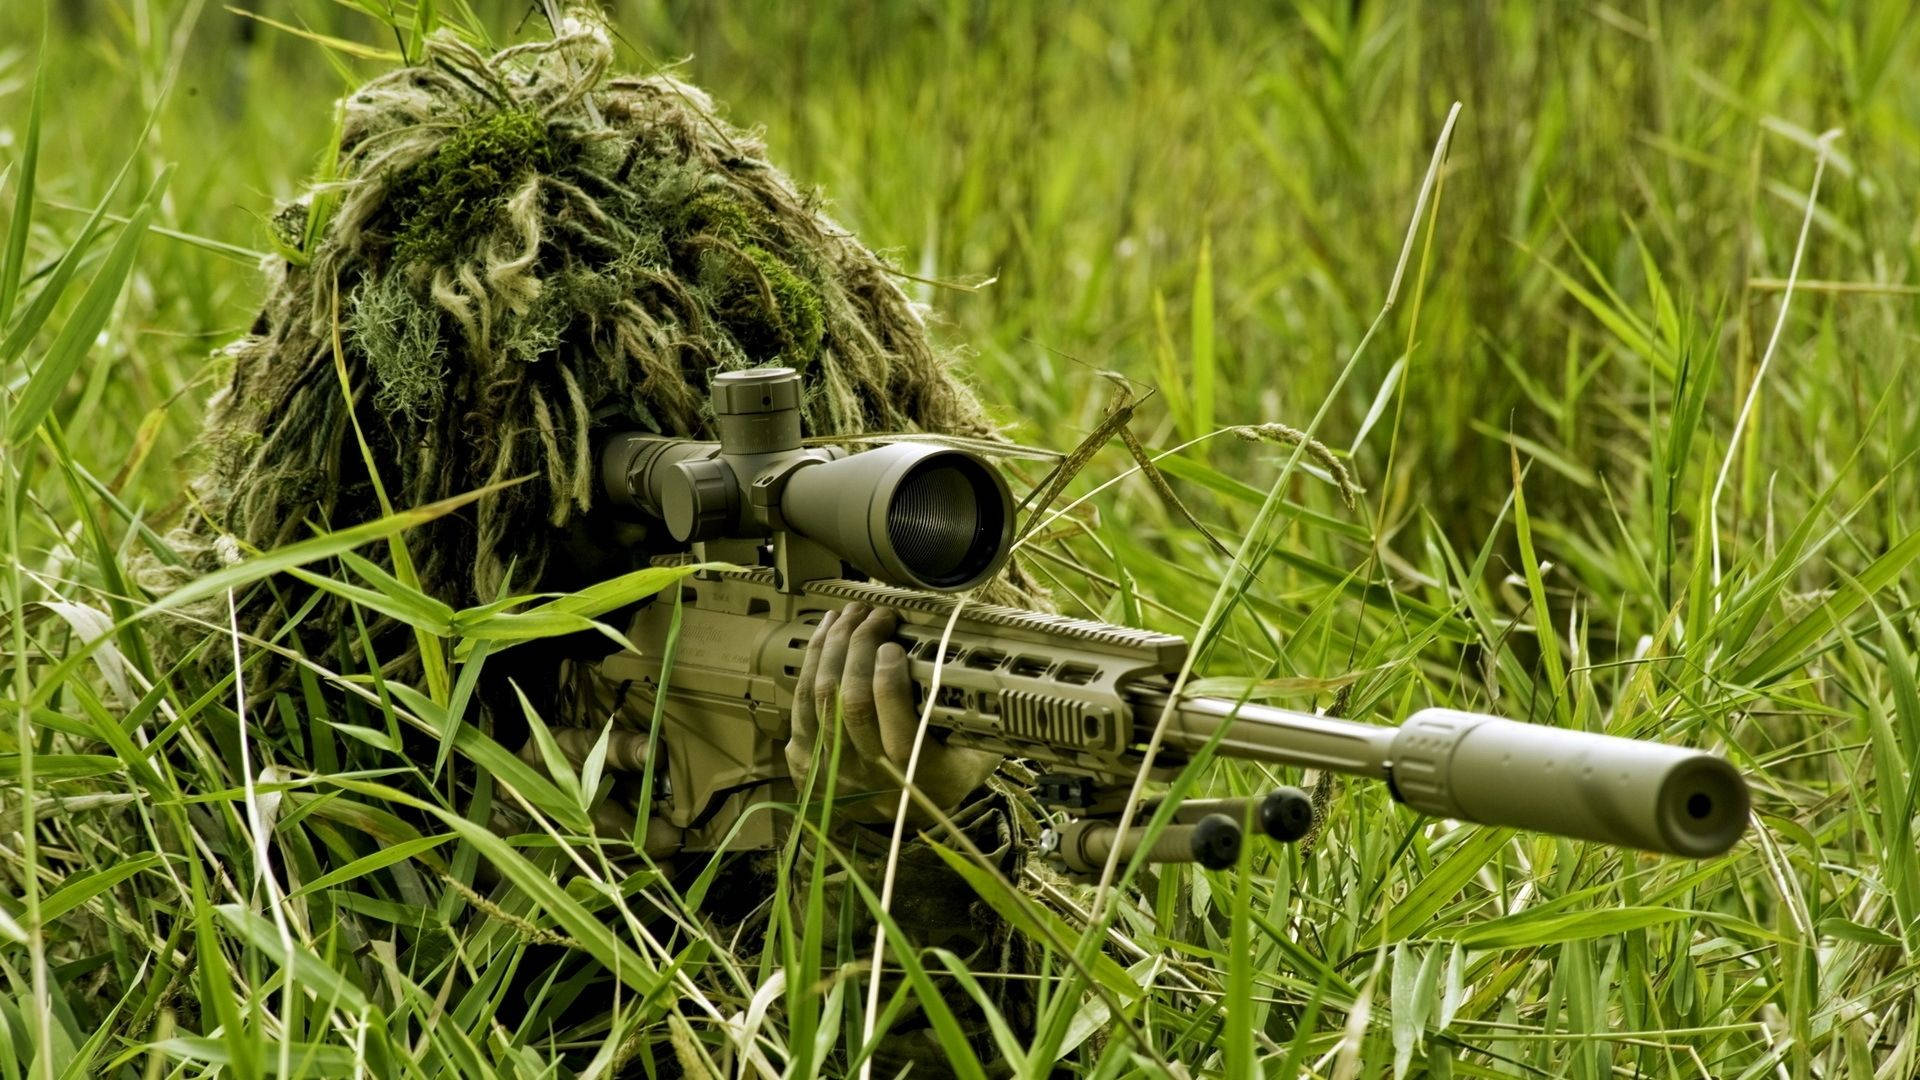 Sniper In Grass Camouflage